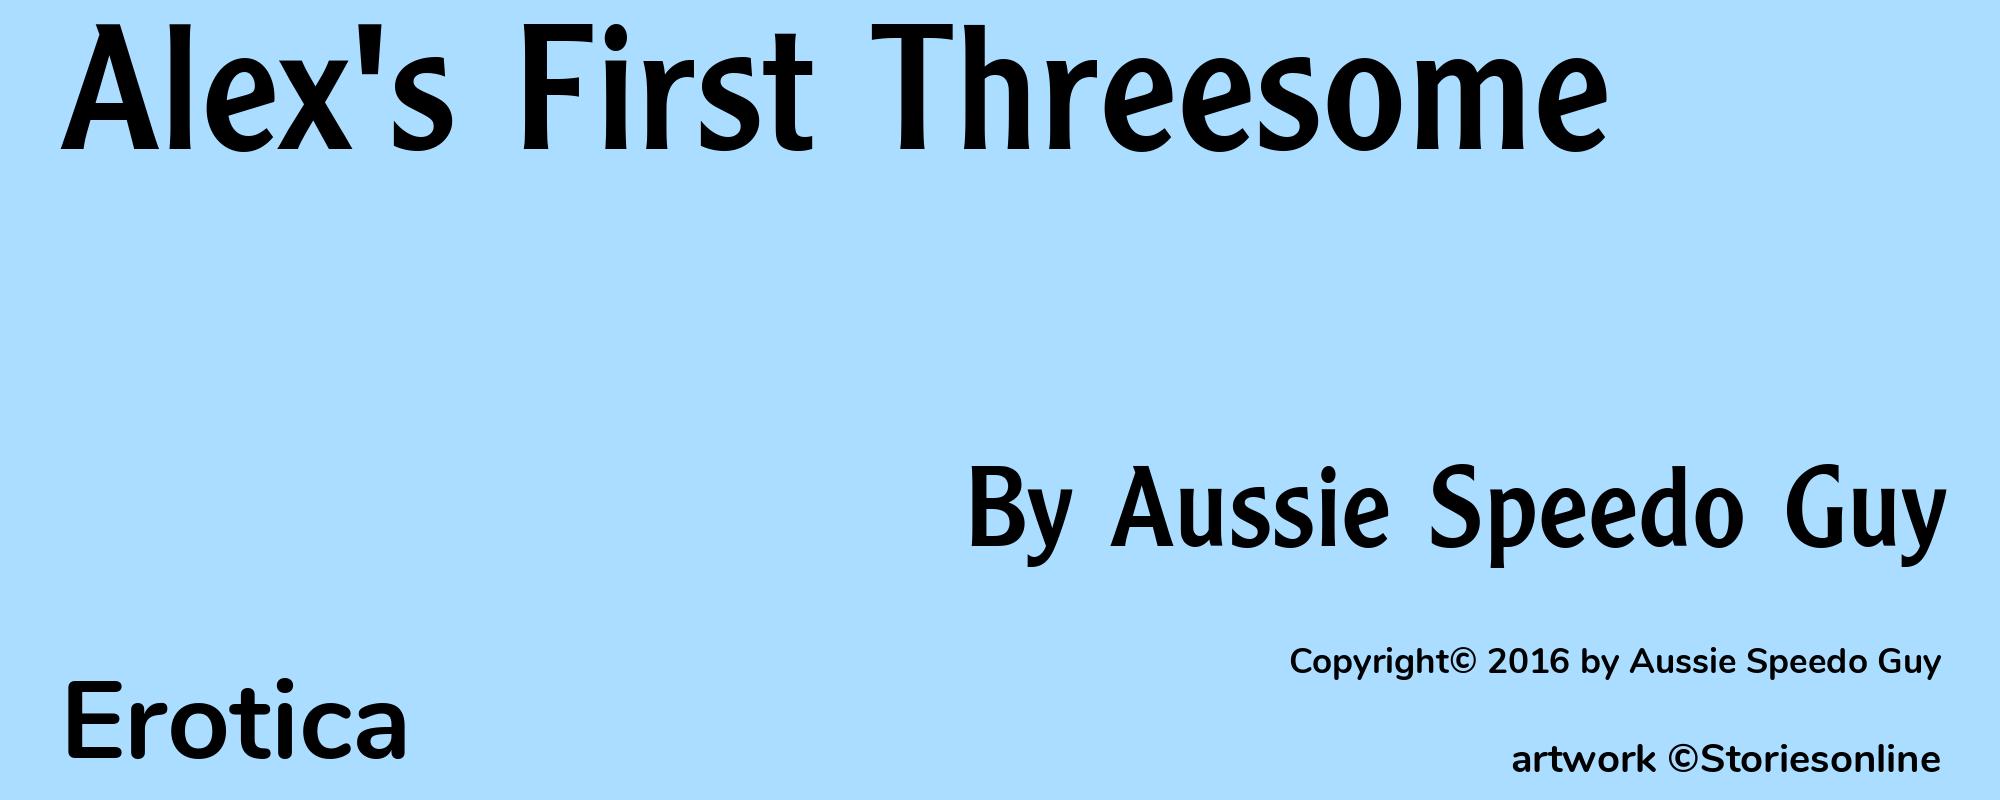 Alex's First Threesome - Cover